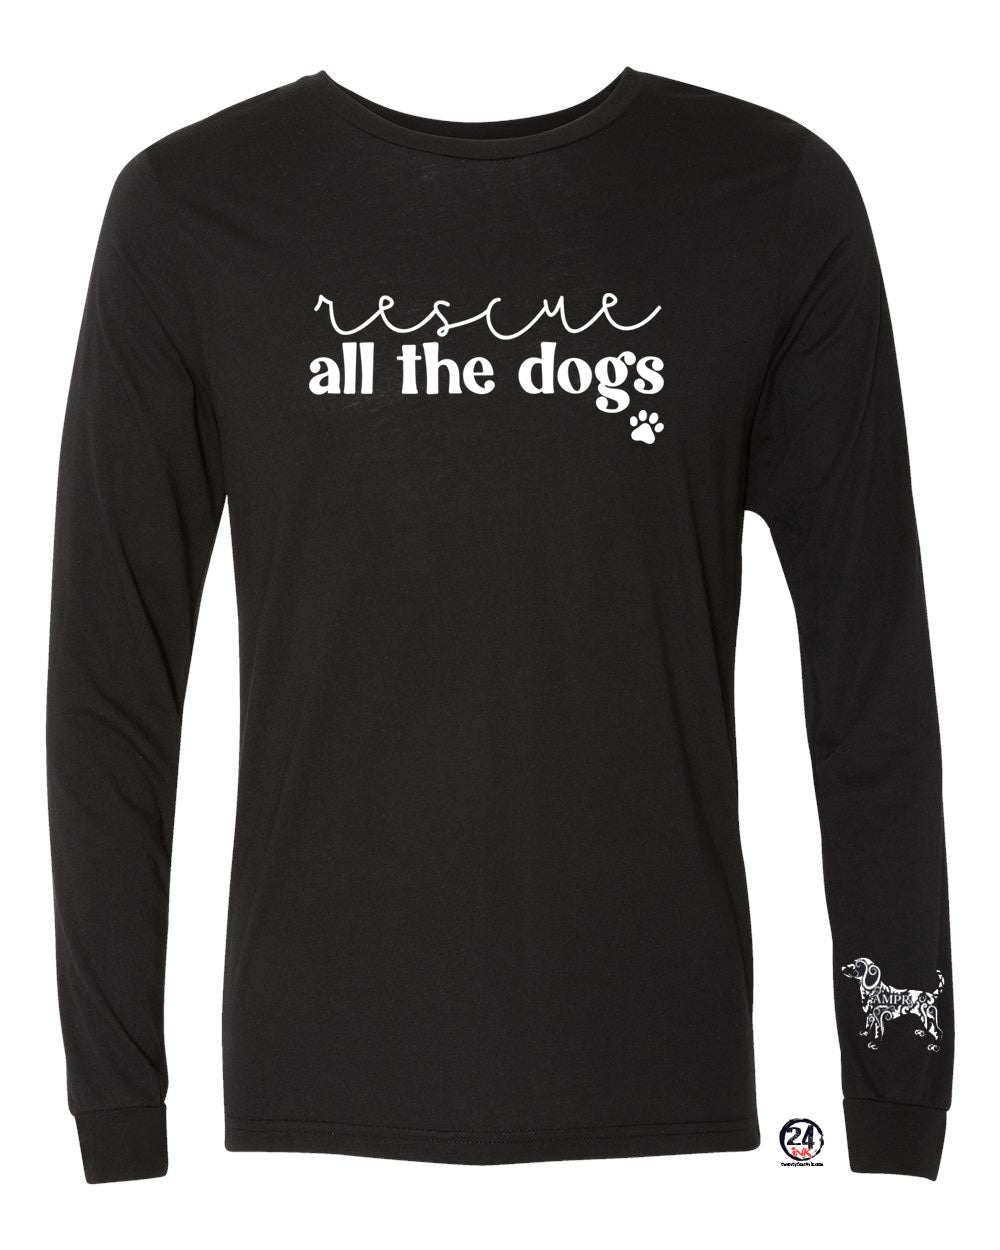 Rescue all the dogs Long Sleeve Shirt